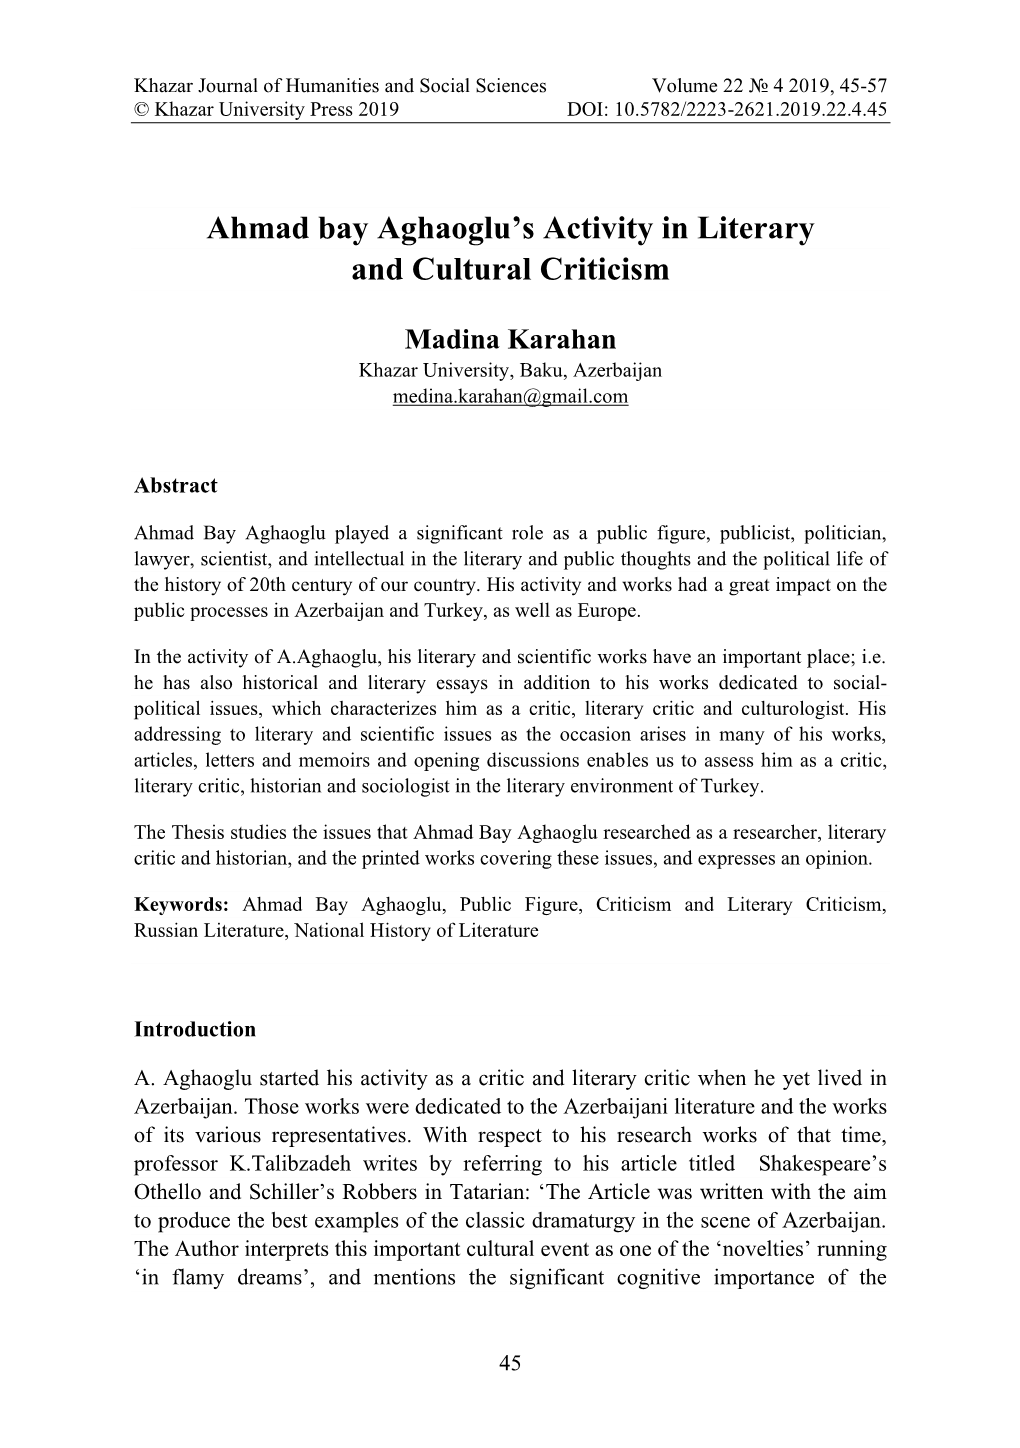 Ahmad Bay Aghaoglu's Activity in Literary and Cultural Criticism